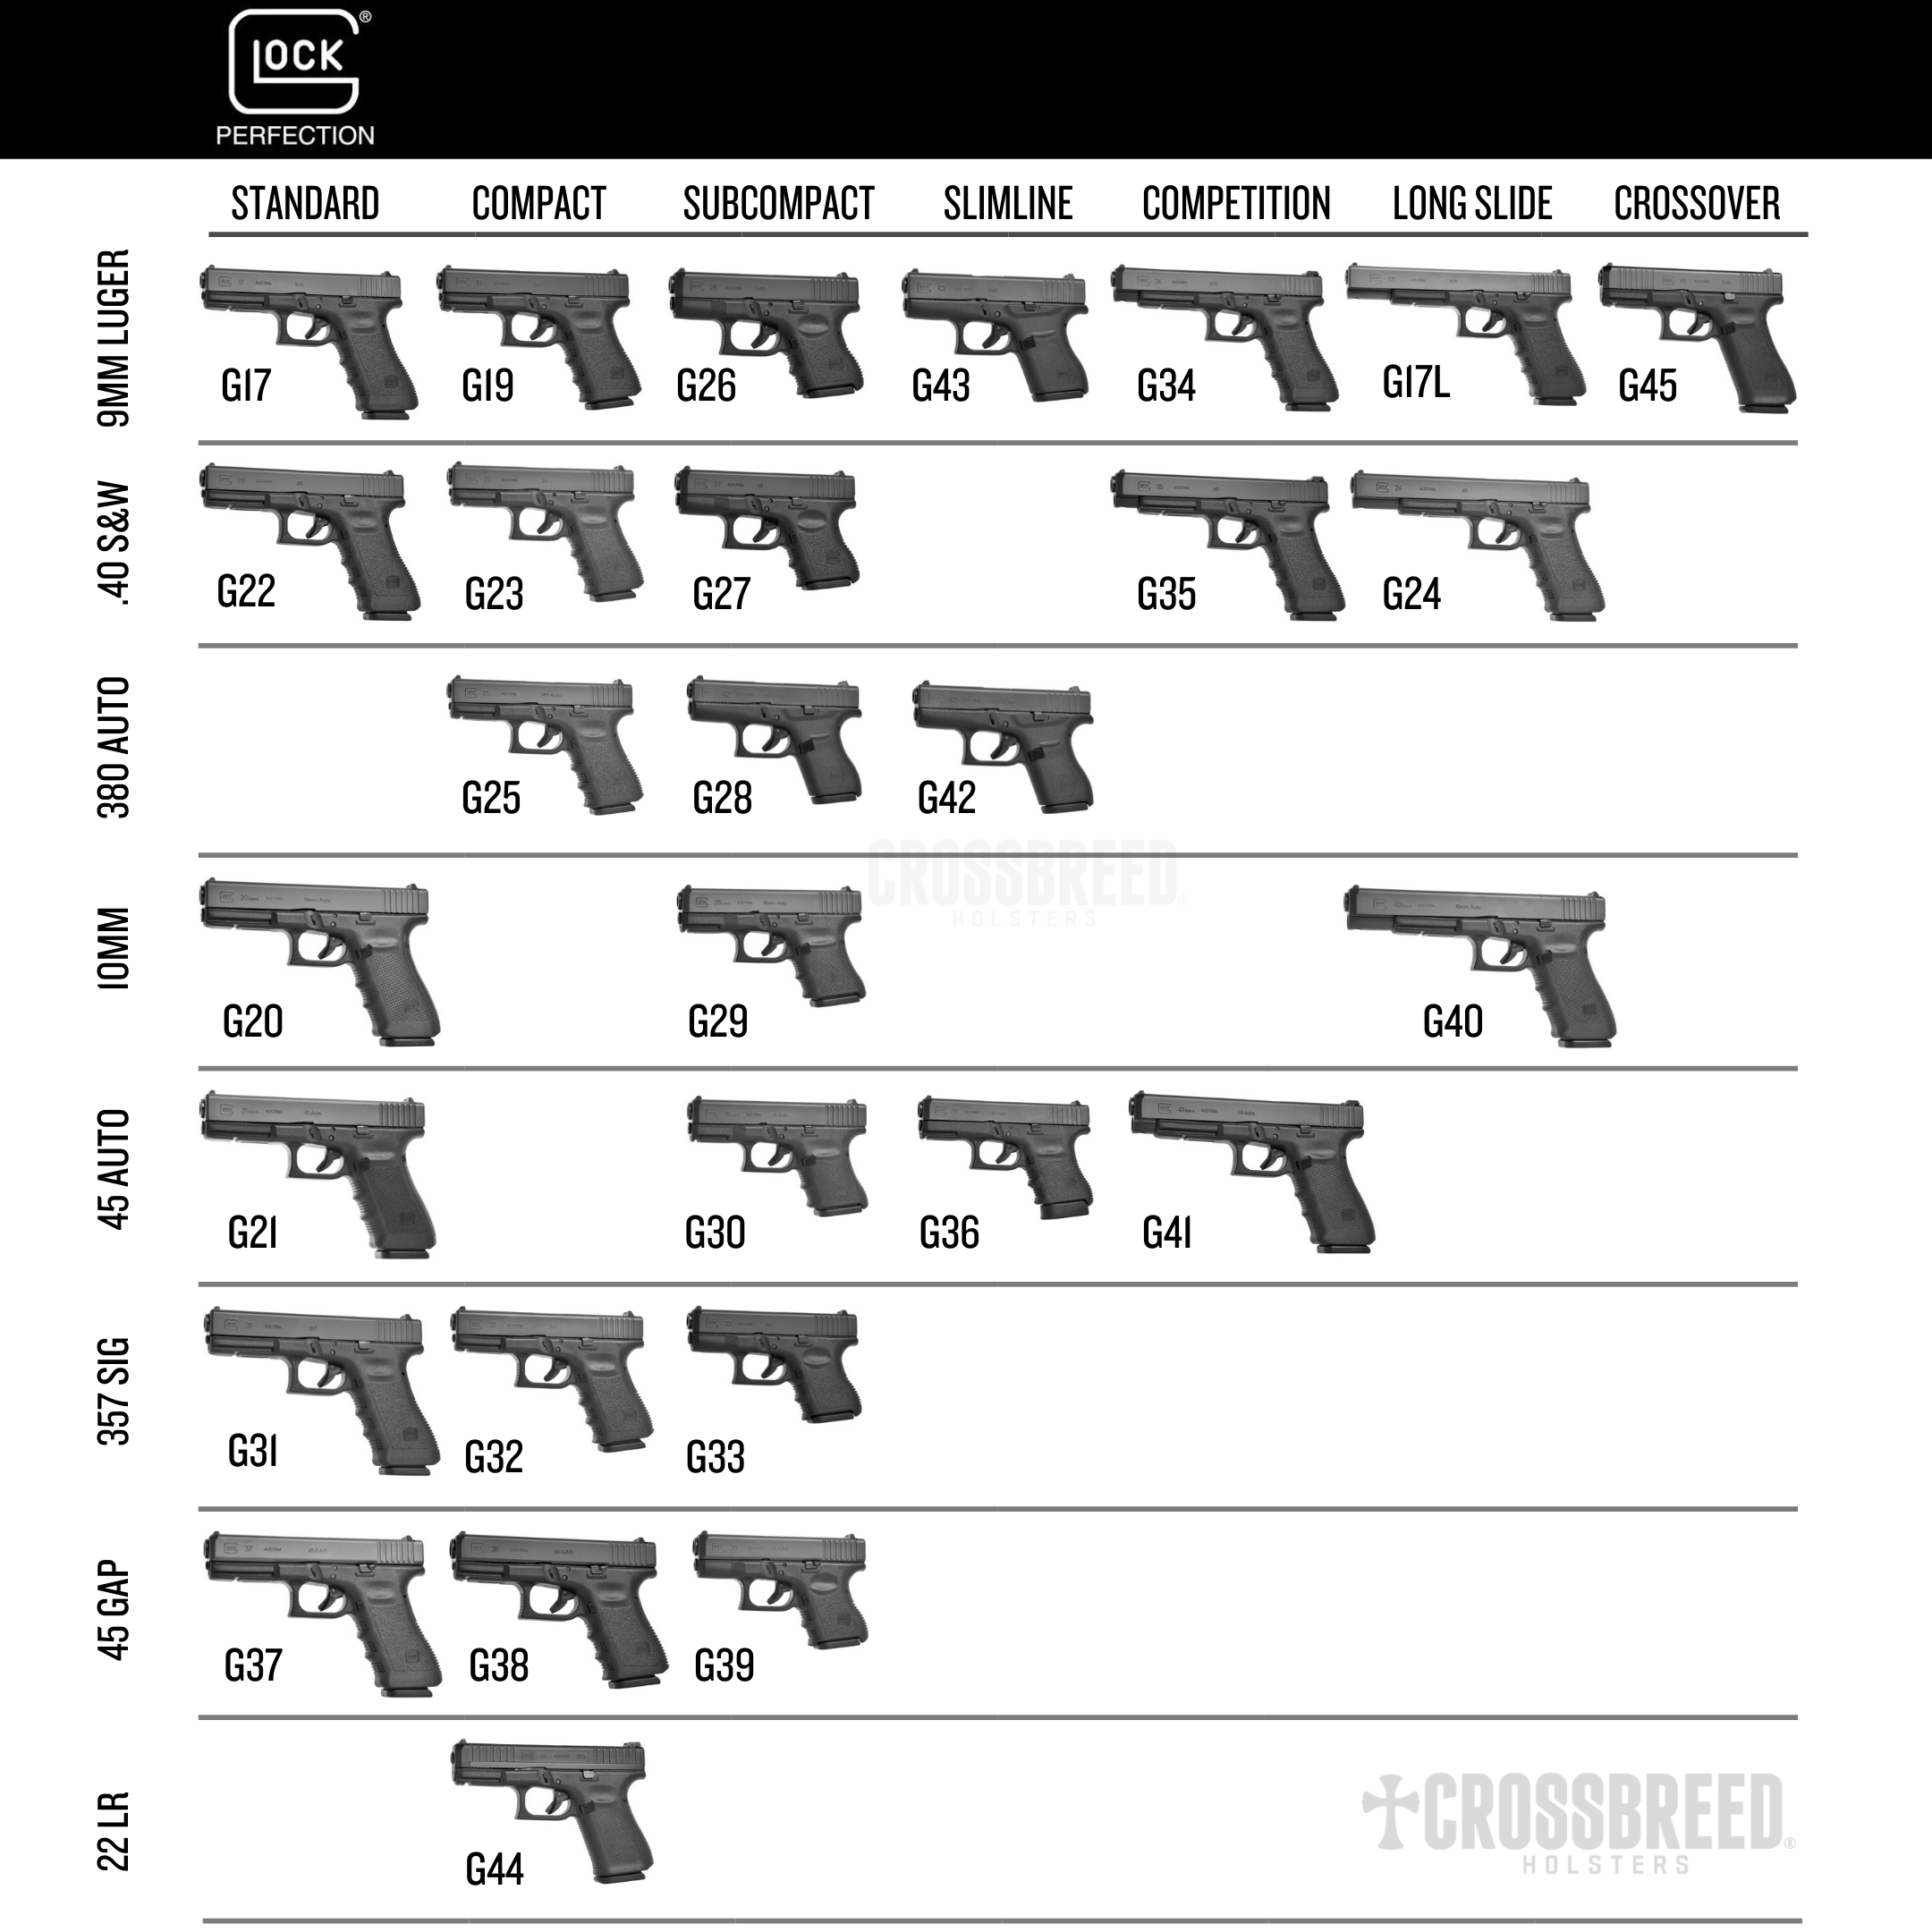 The Glock Encyclopedia Volume 2 Sizes, Models, and More!